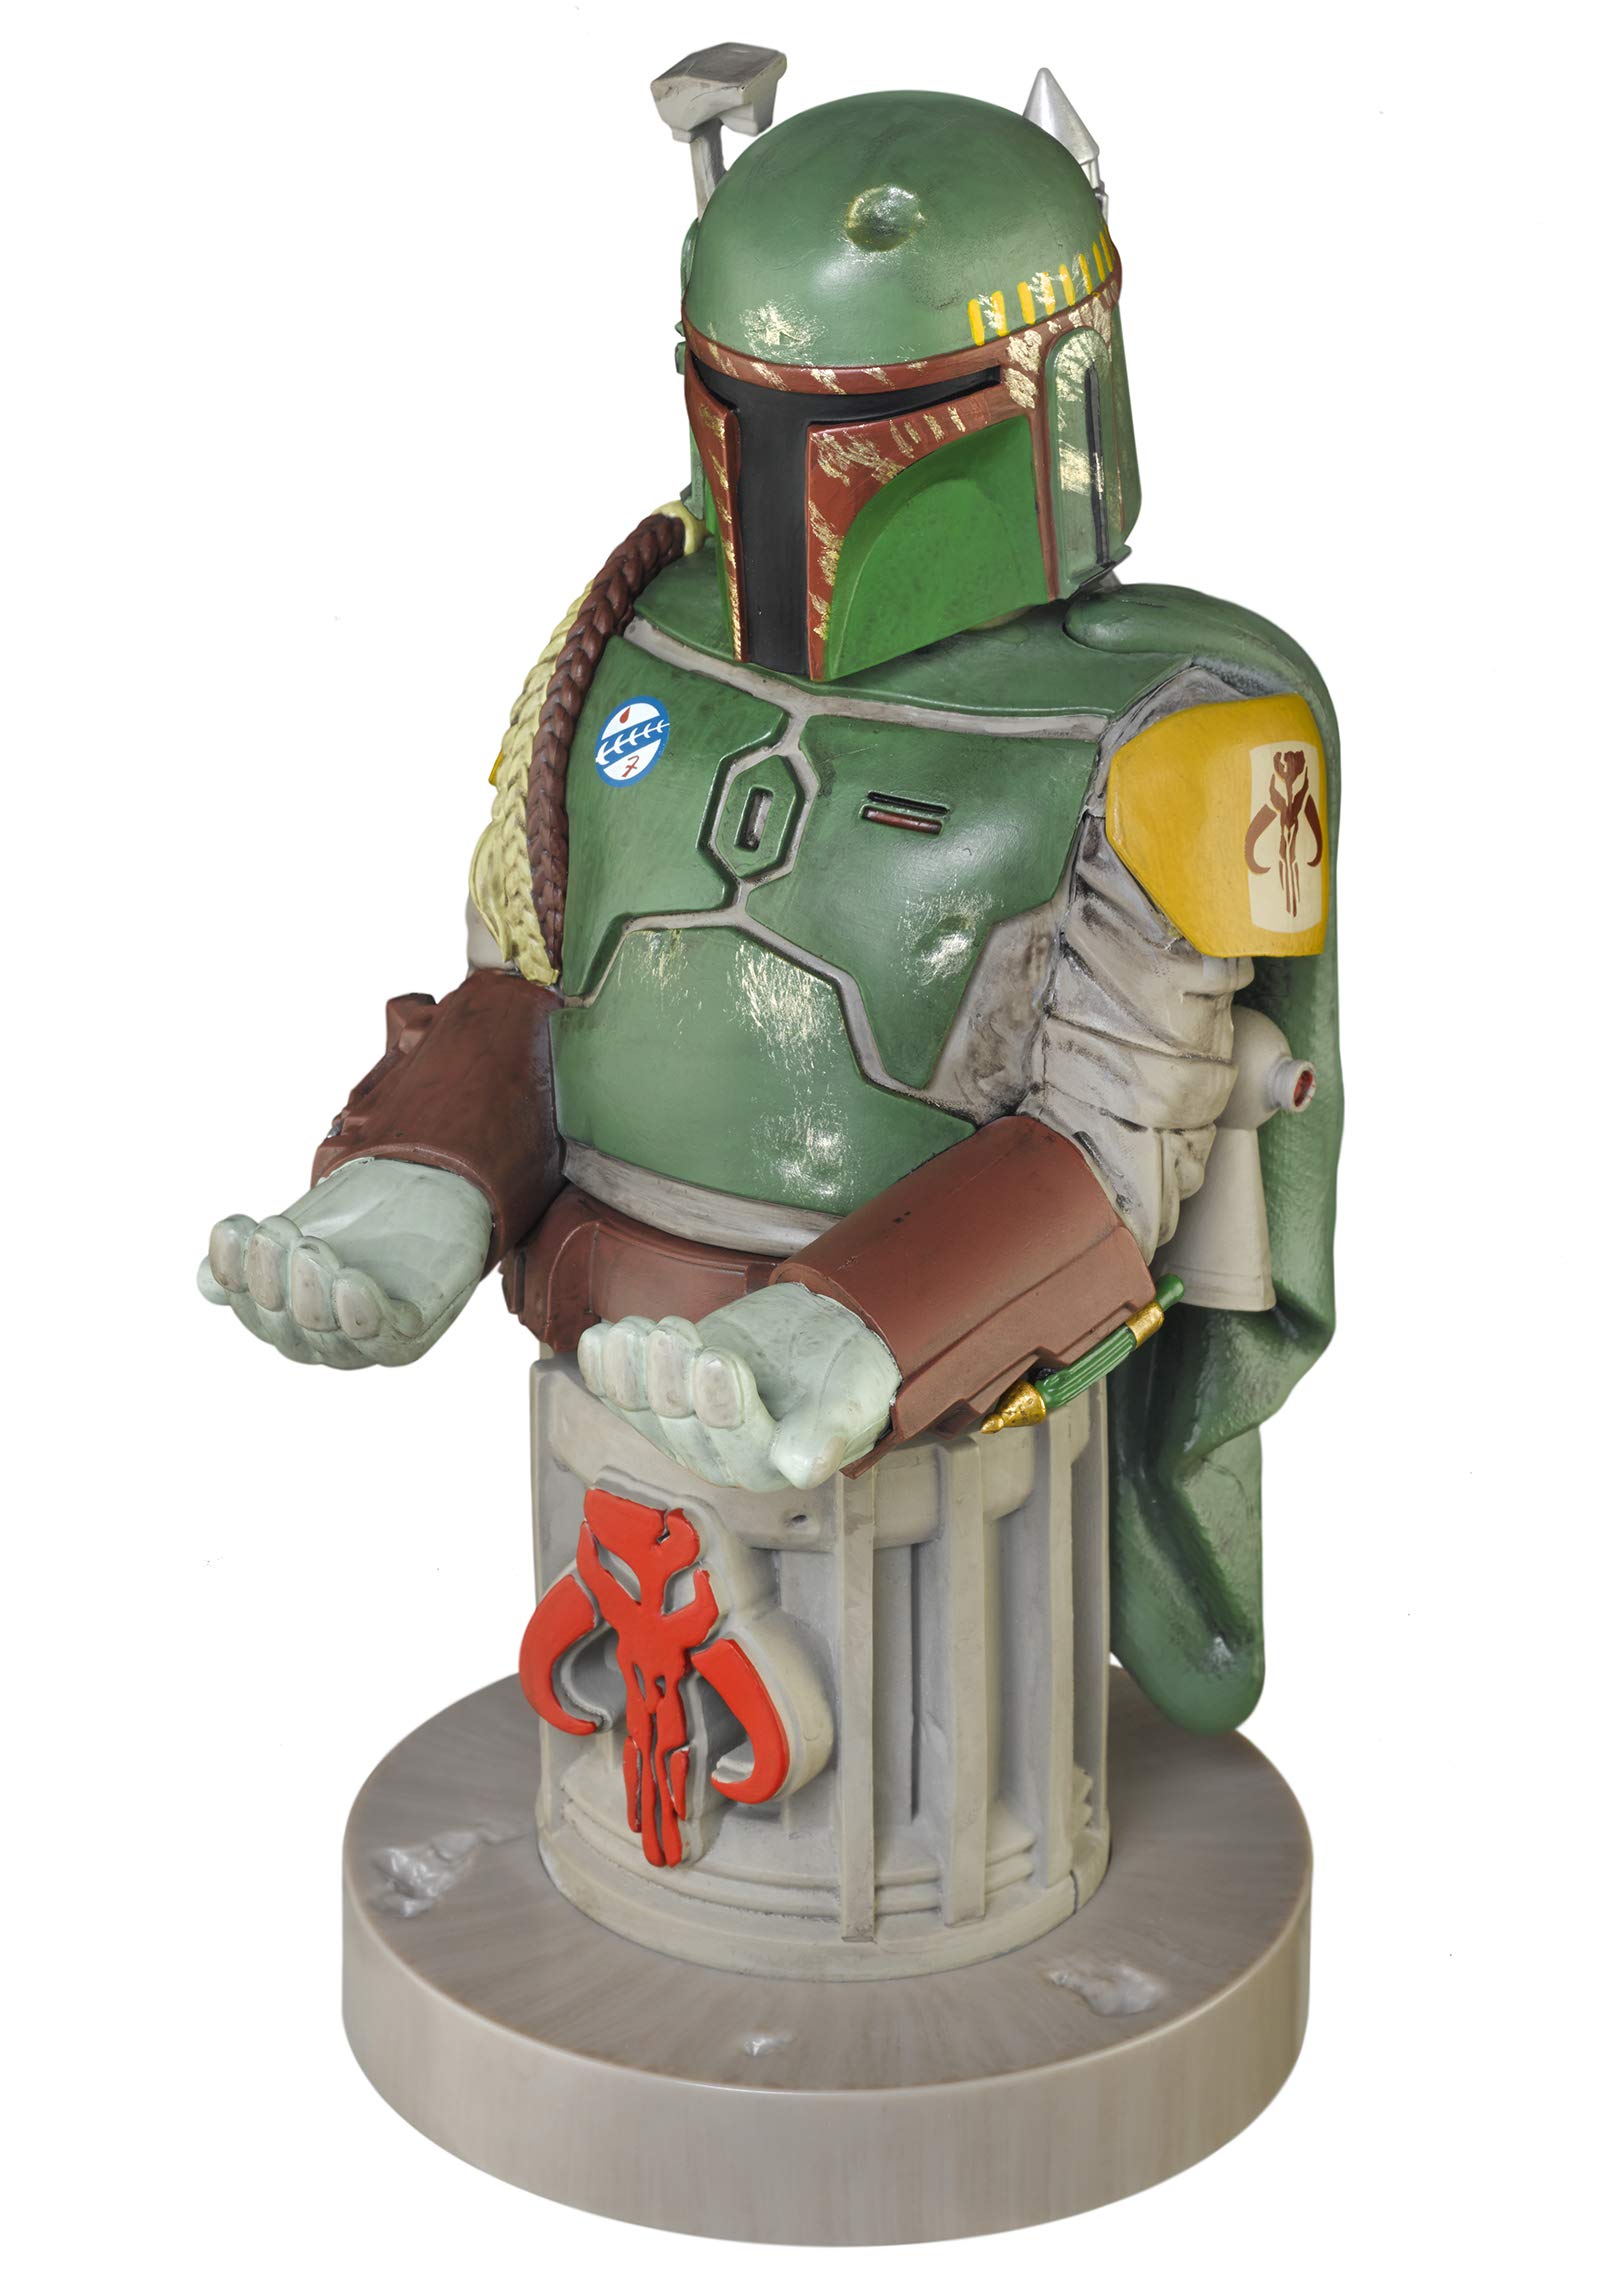 Exquisite Gaming Boba Fett Cable Guys Mobile Phone and Controller Holder - Not Machine Specific, Green